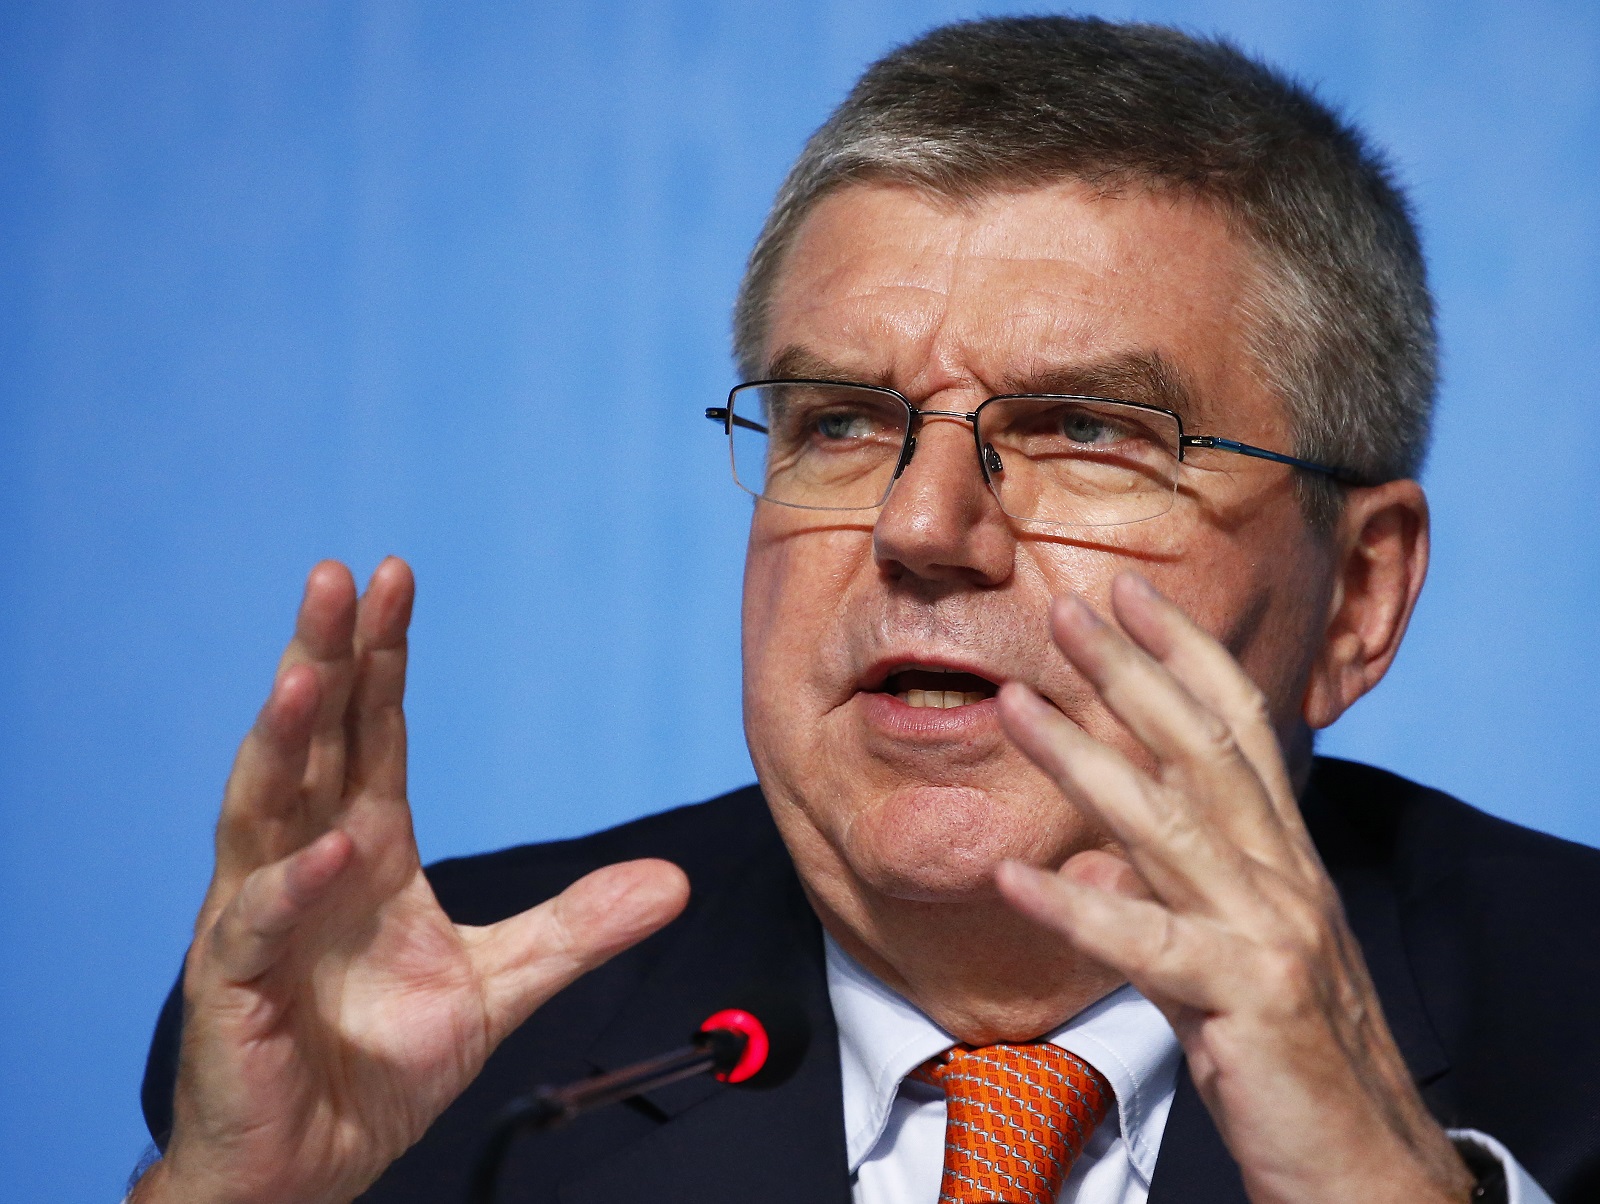 epa09065673 (FILE) IOC President Thomas Bach of Germany gestures during a press conference in Rio de Janeiro, Brazil, 04 August 2016. The Rio 2016 Olympic Games will take place from 05 to 21 August 2016  (reissued on 10 March 2021). Thomas Bach has been re-elected President of the International Olympic Committee (IOC) to serve a final four-year term, the IOC announed on 10 March 2021.  EPA/LARRY W. SMITH *** Local Caption *** 52925631